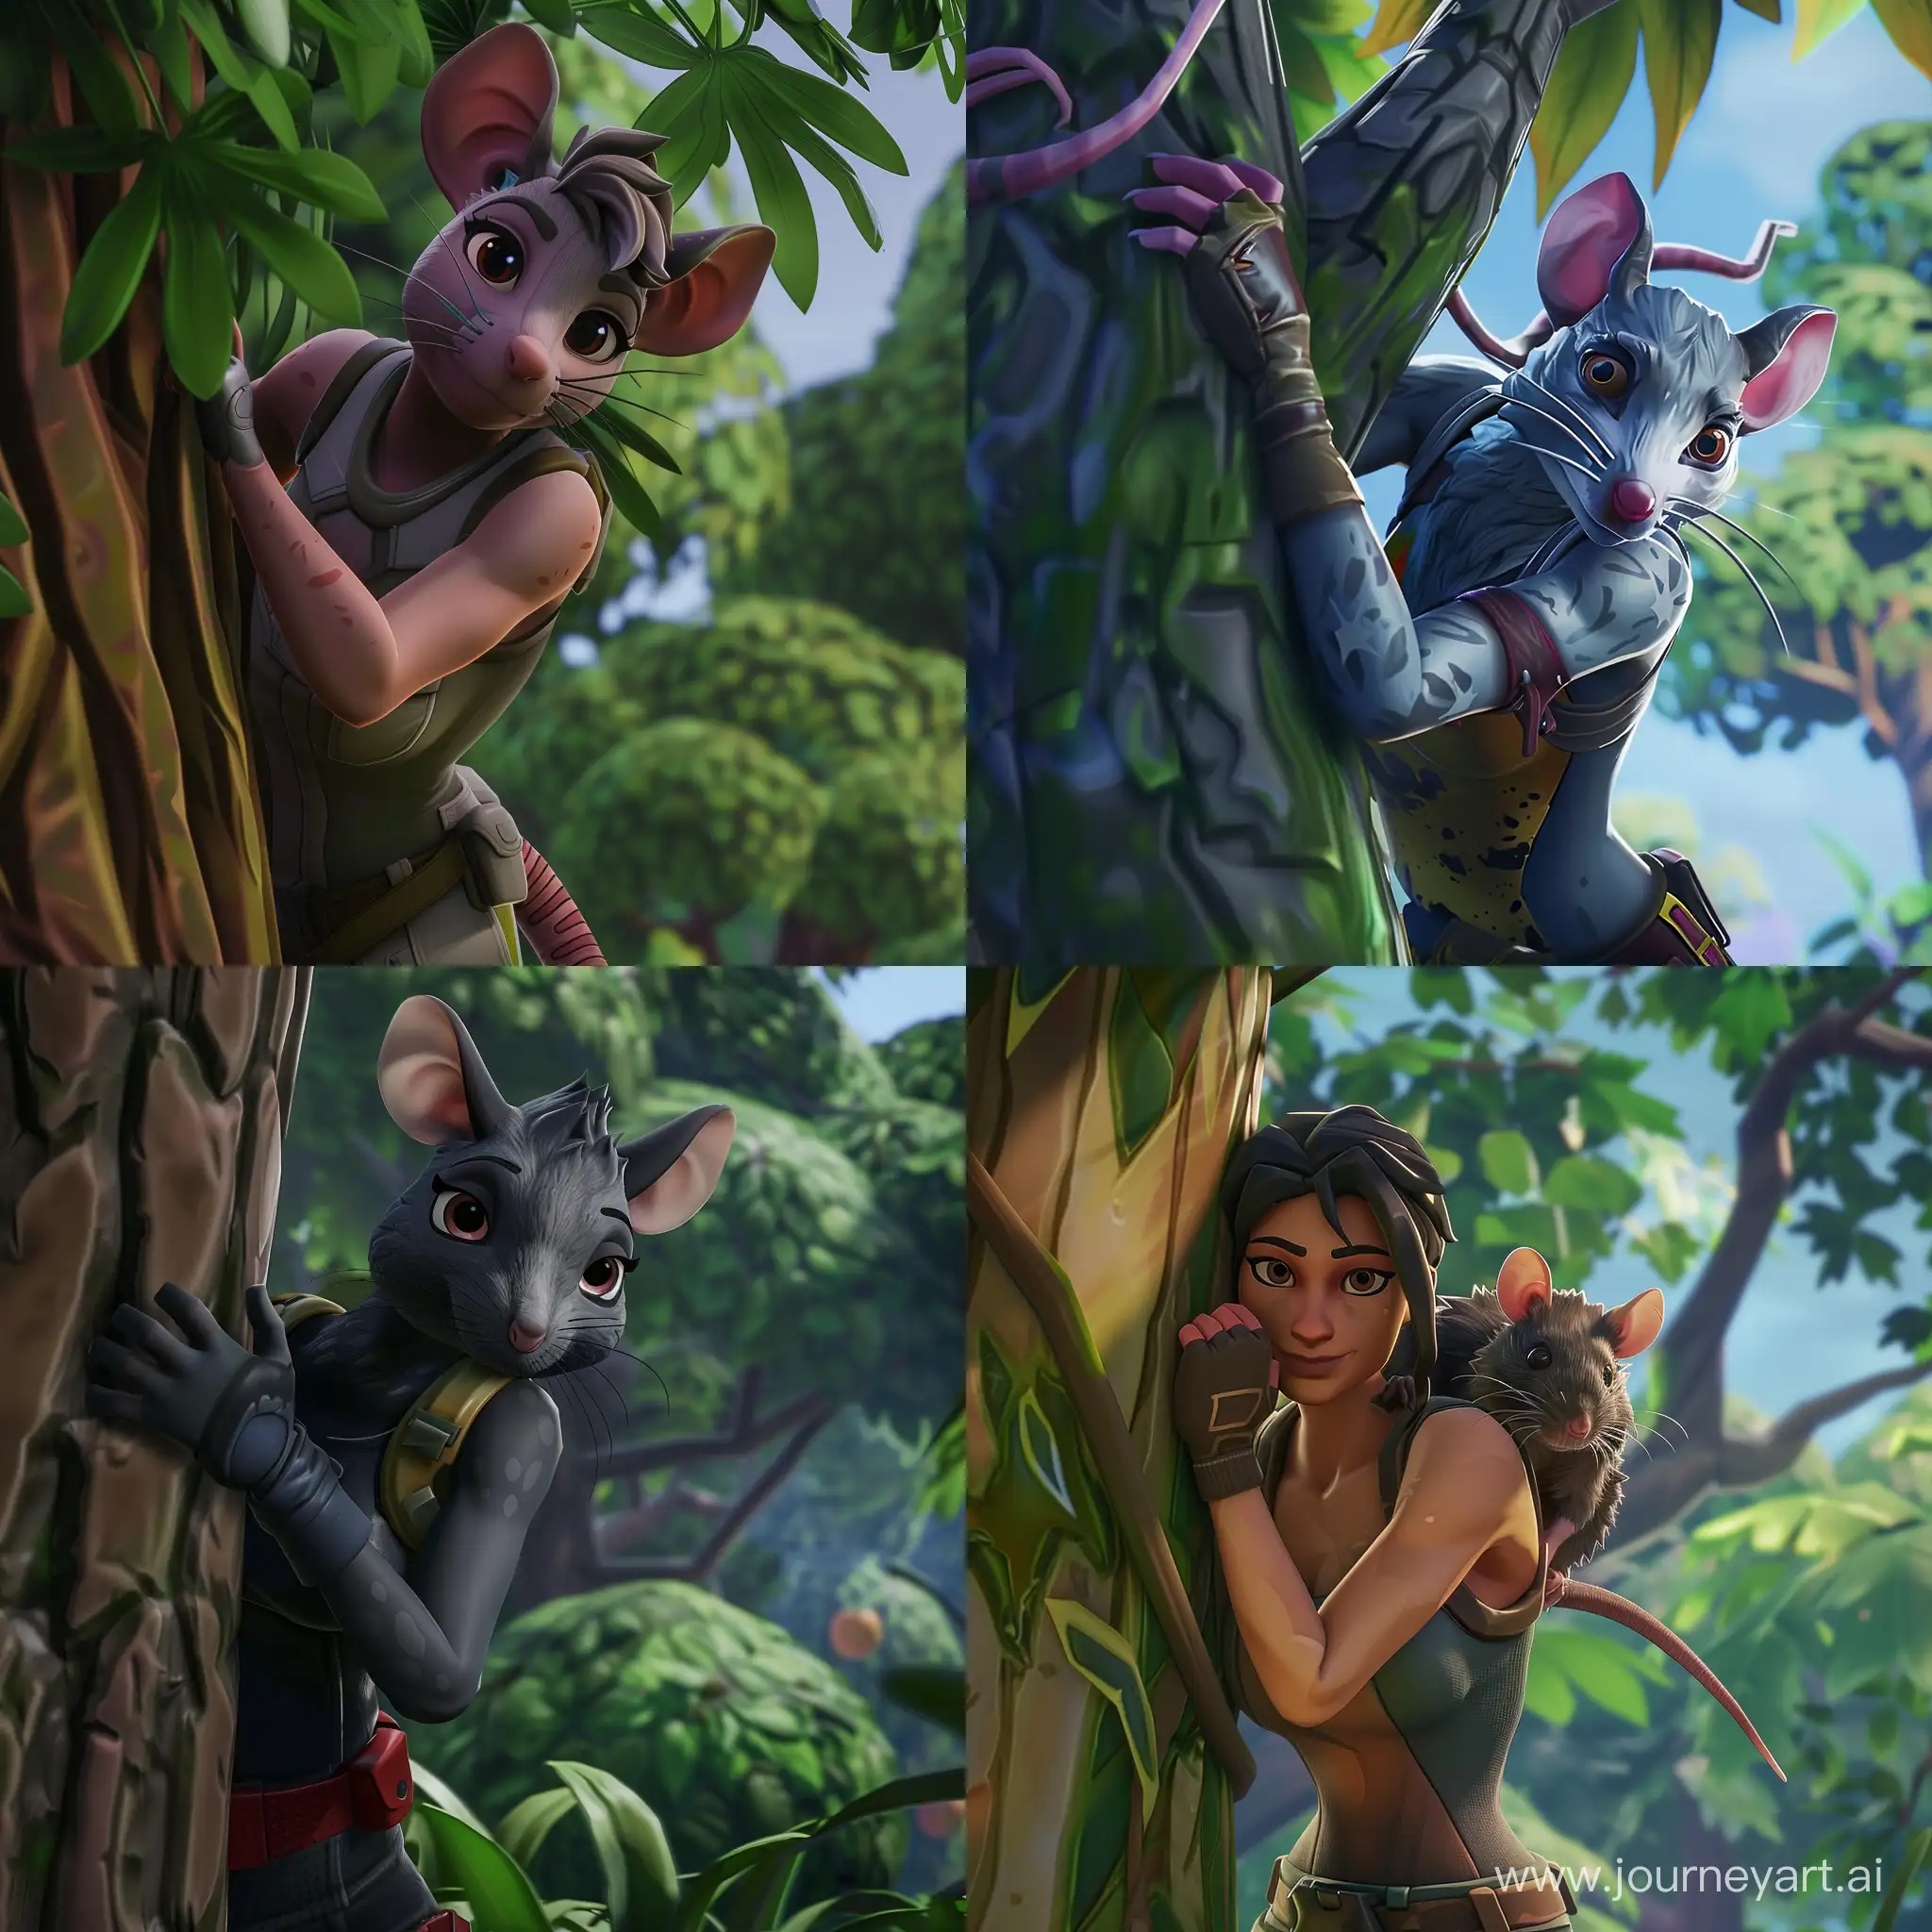 Camille-Fortnite-Skin-Rat-Form-Taking-Cover-Behind-Tree